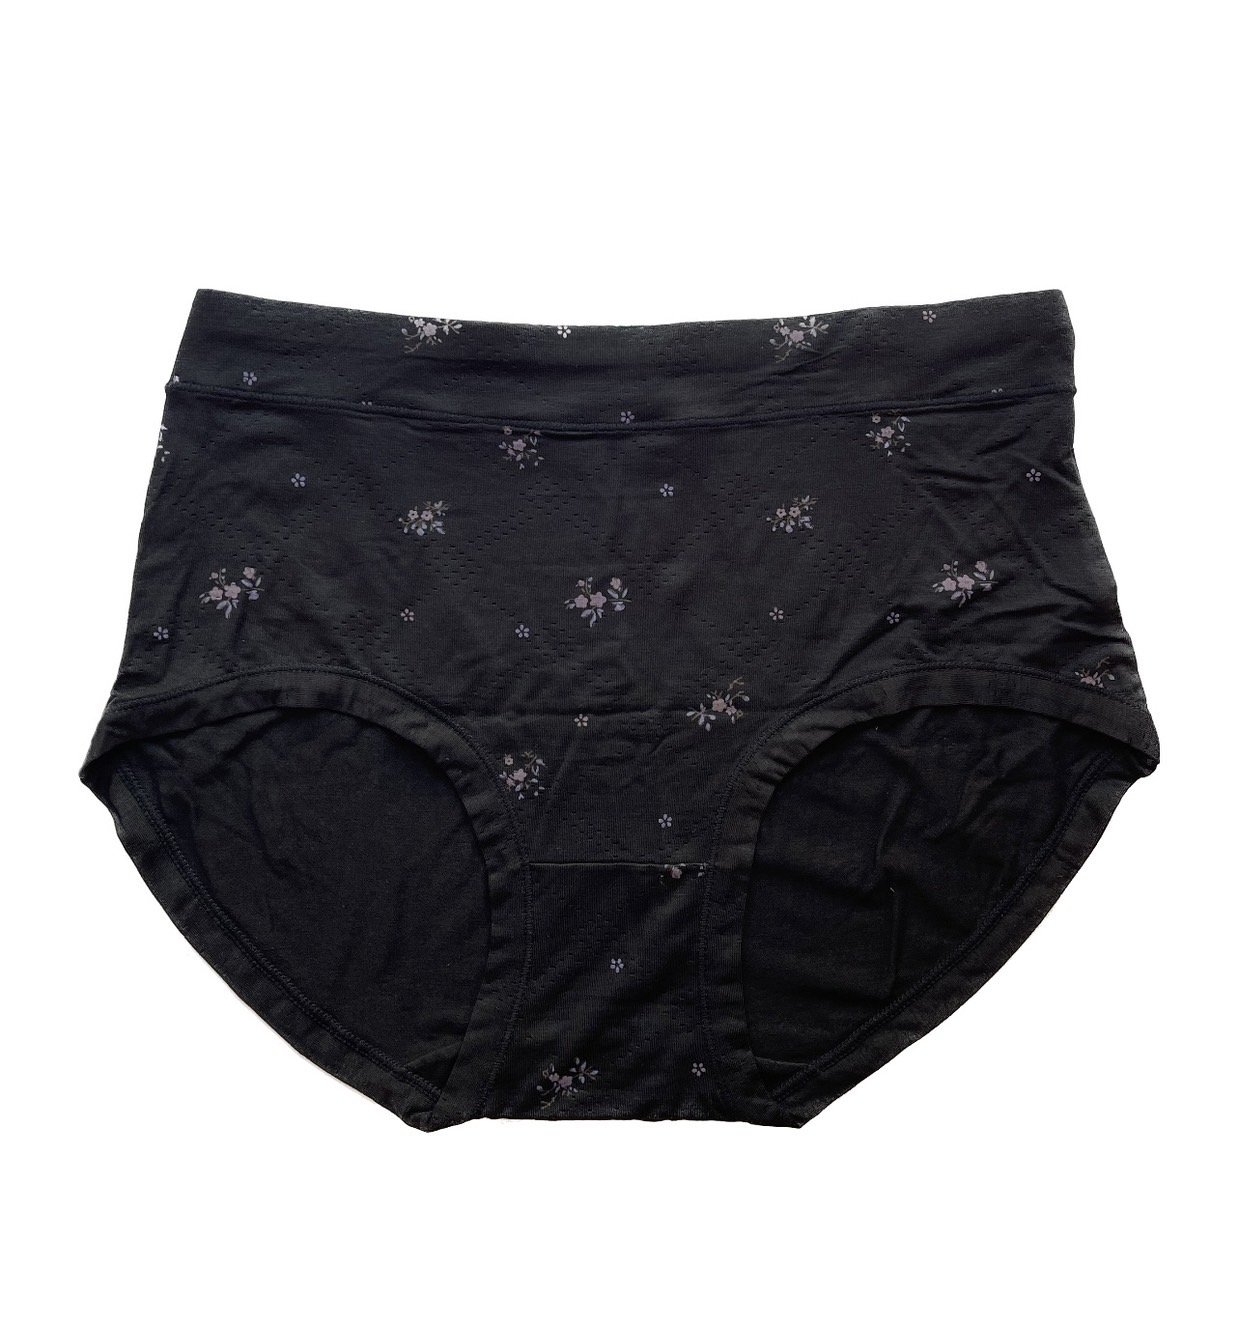 Floral Soft Cotton Fabric High Waist Panty by Skinn intimate